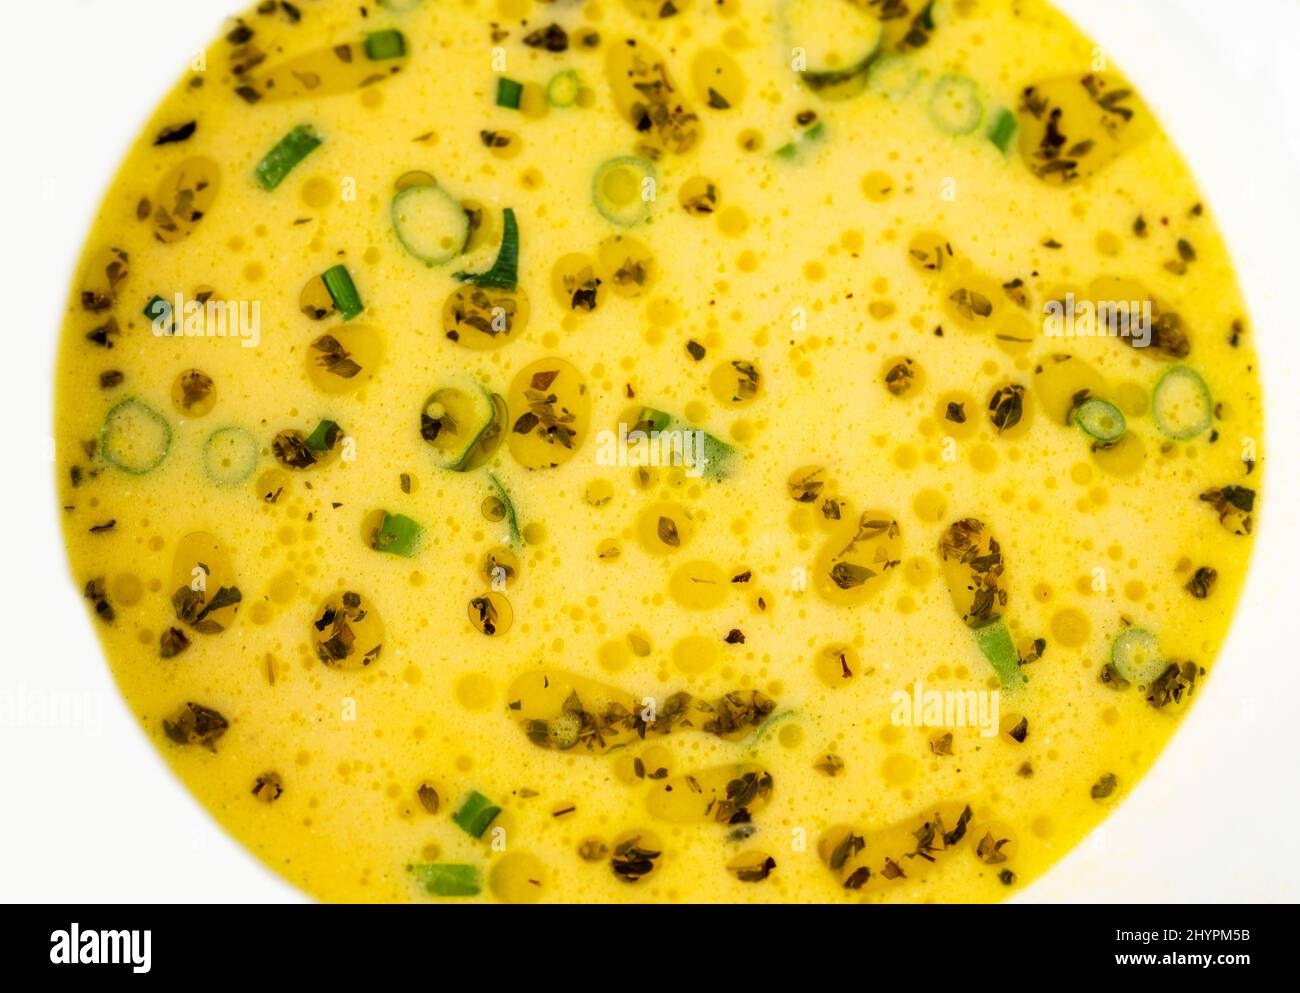 Cheese soup, detail of yellow decorative surface with oregano herb, green onion shoot and oil circle in white plate. Stock Photo